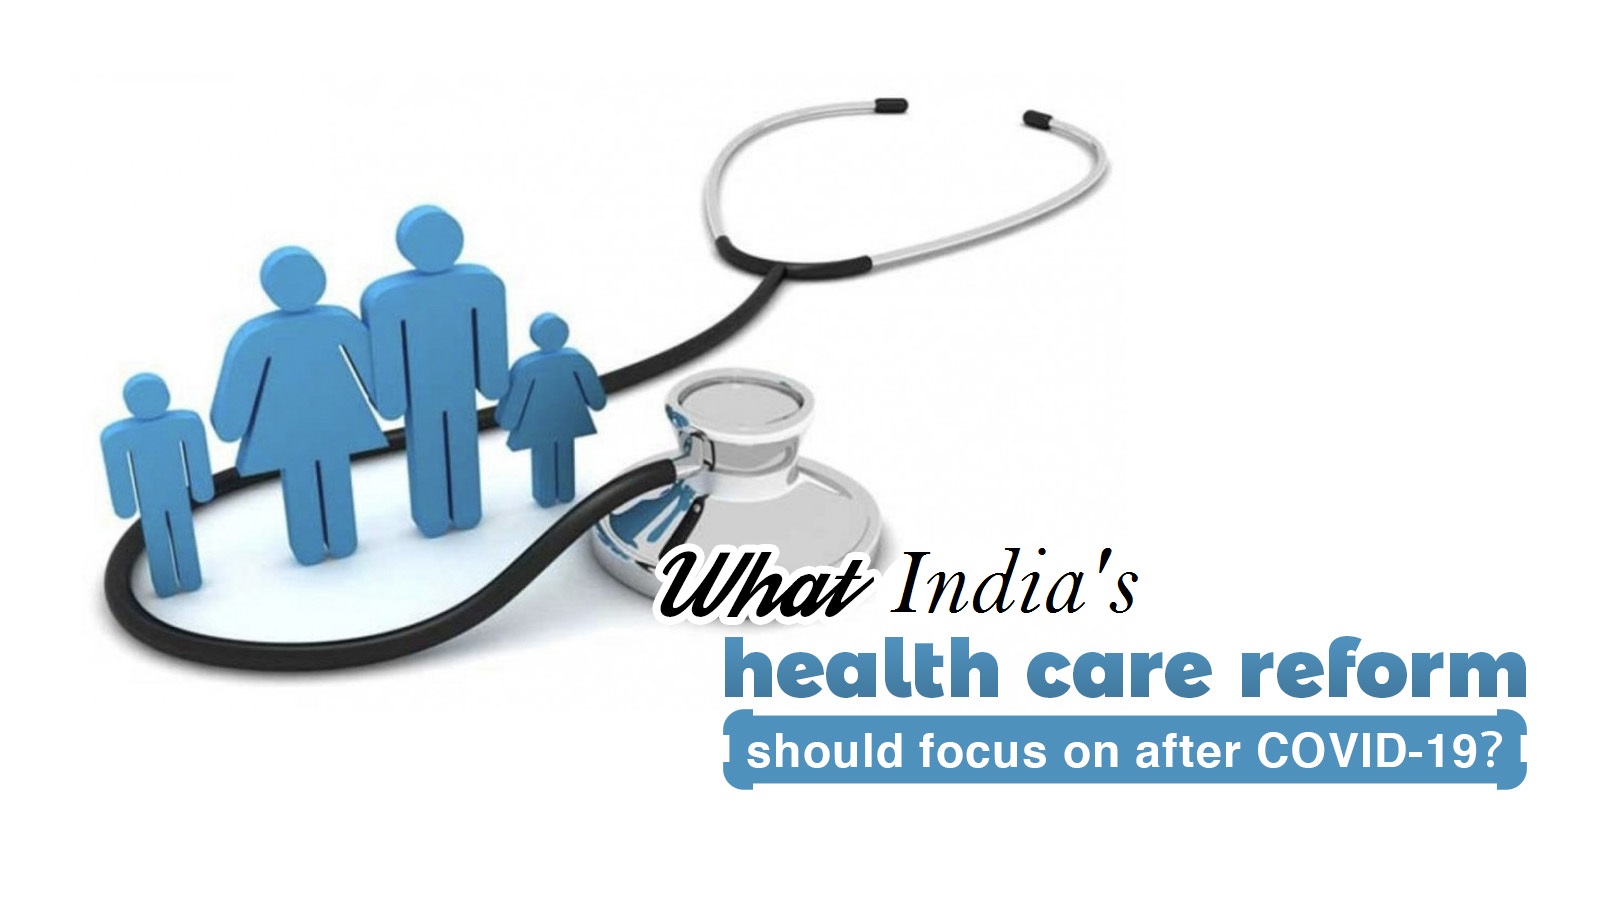 why-going-digital-is-important-for-india-to-reform-its-healthcare-after-covid19-pandemic